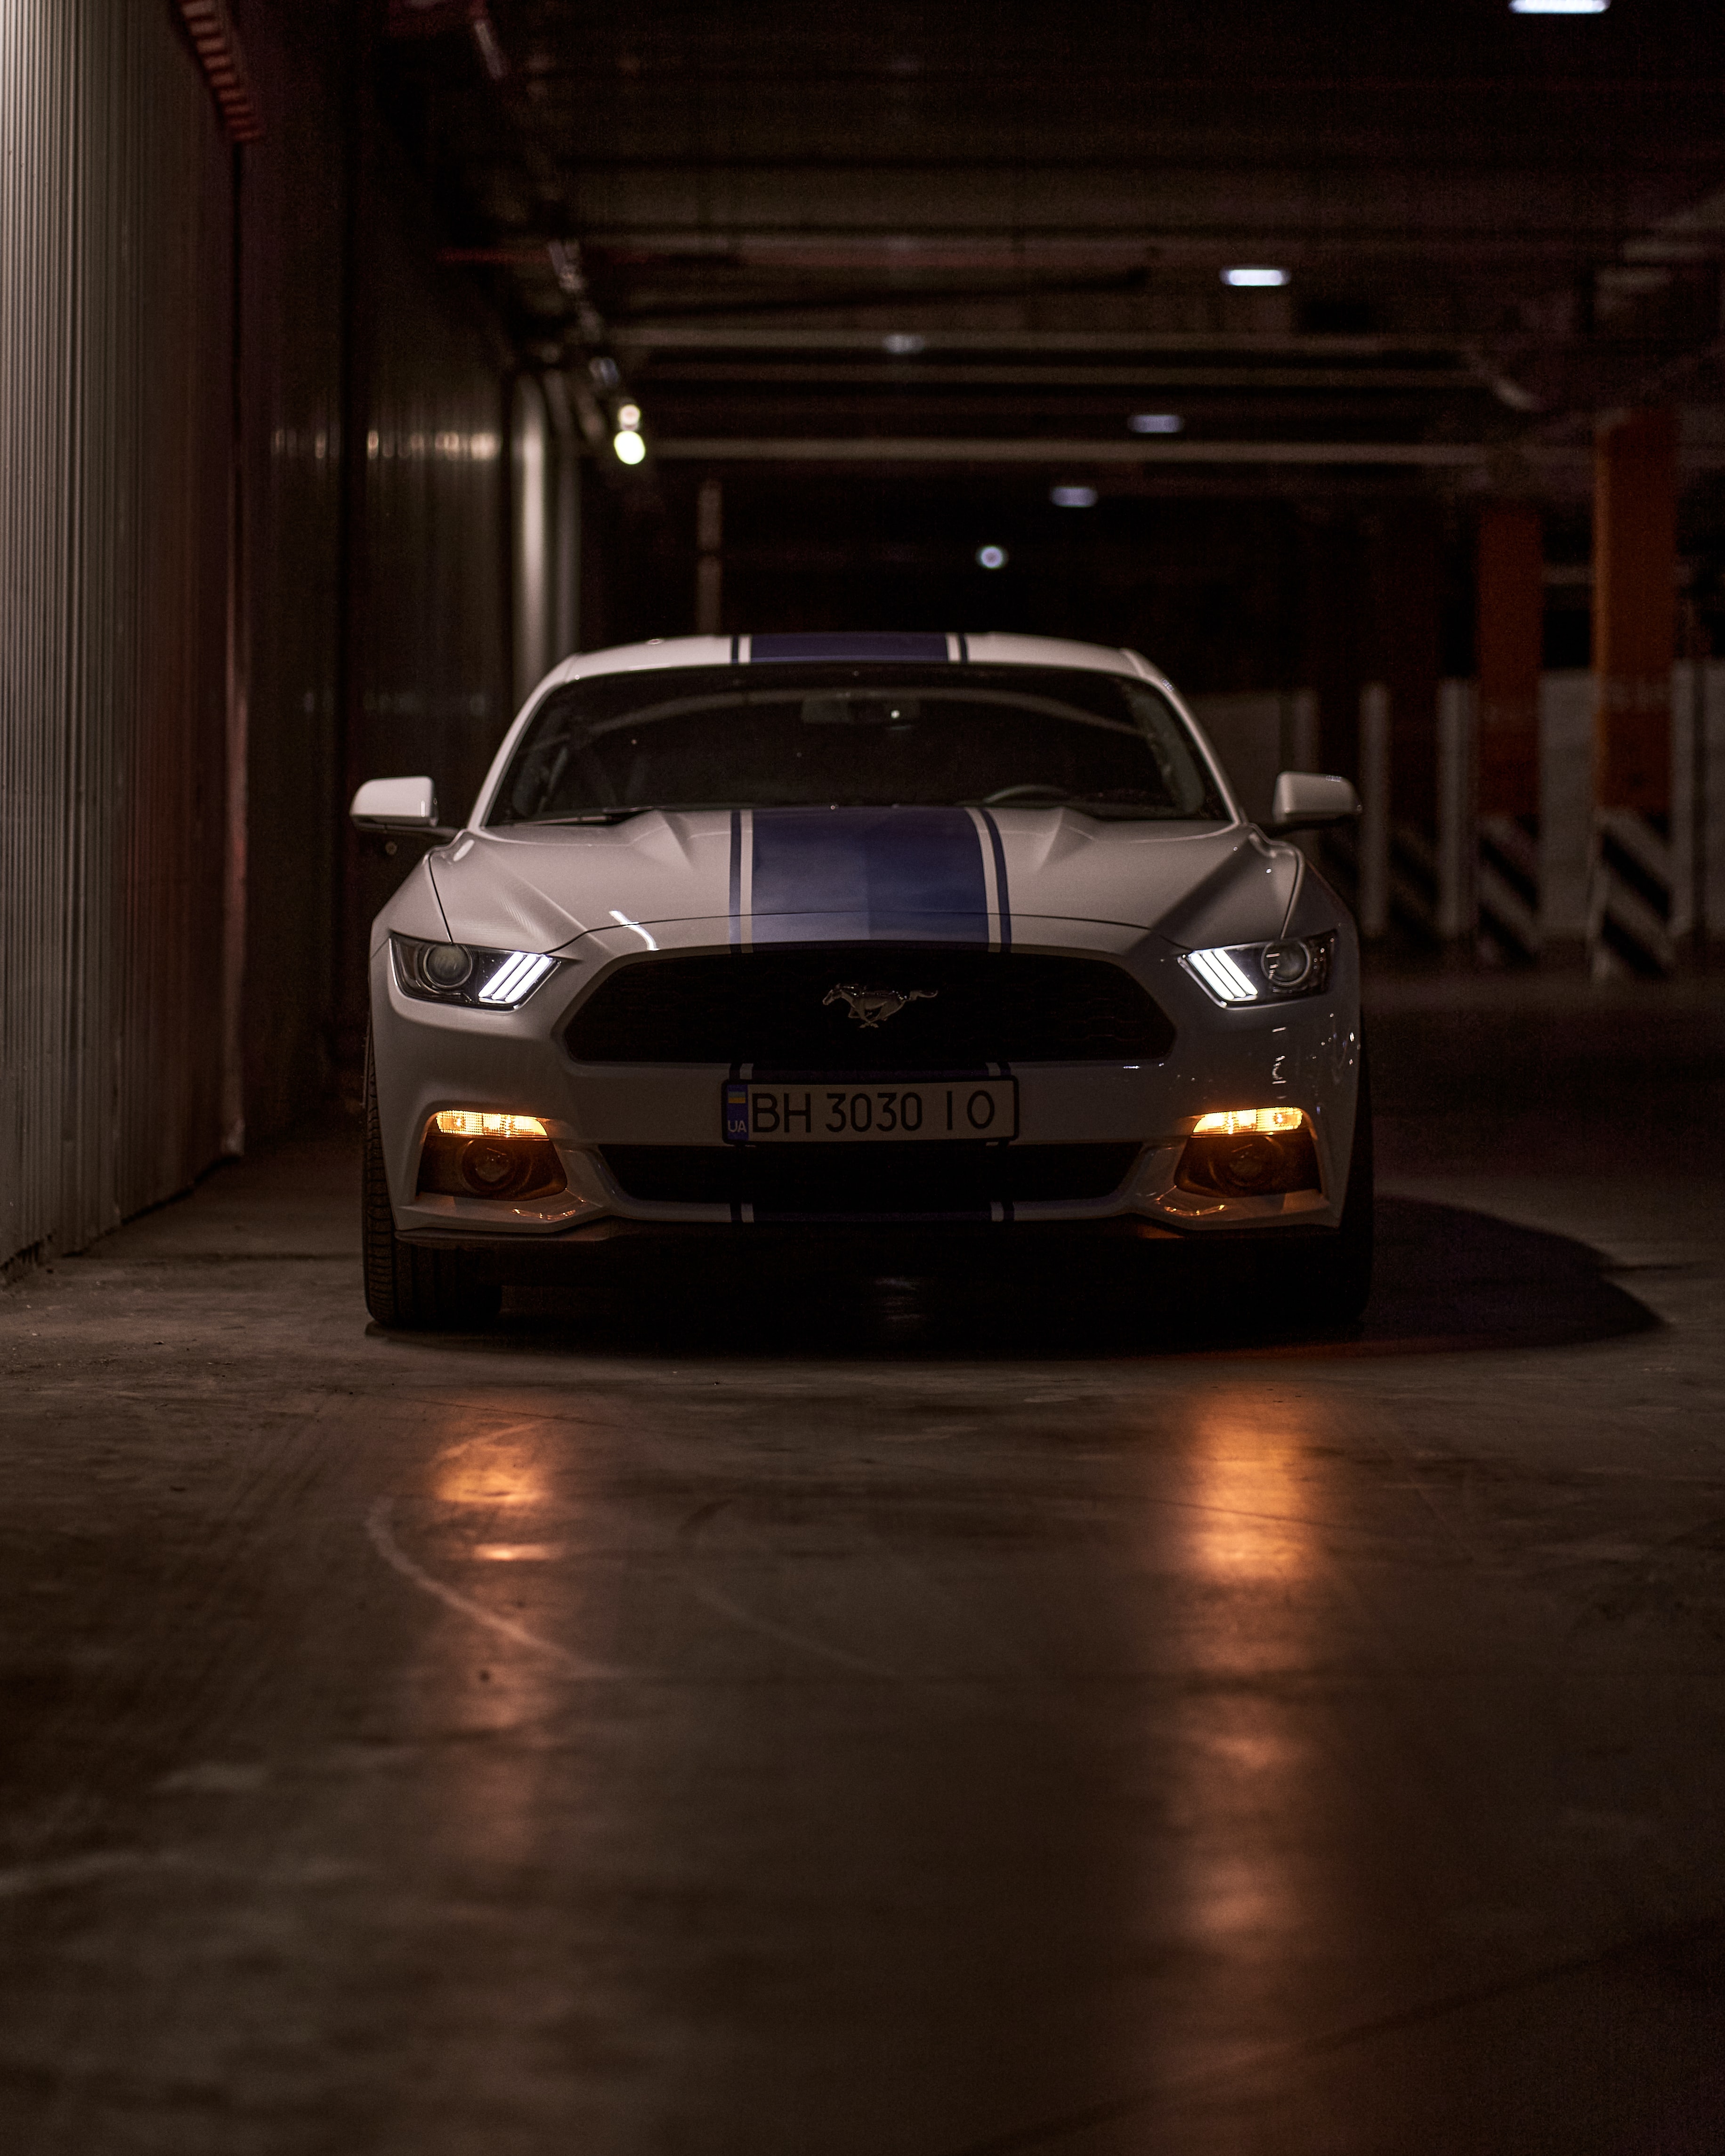 cars, car, mustang, front view, sports car, mustang gt, lights, headlights, sports